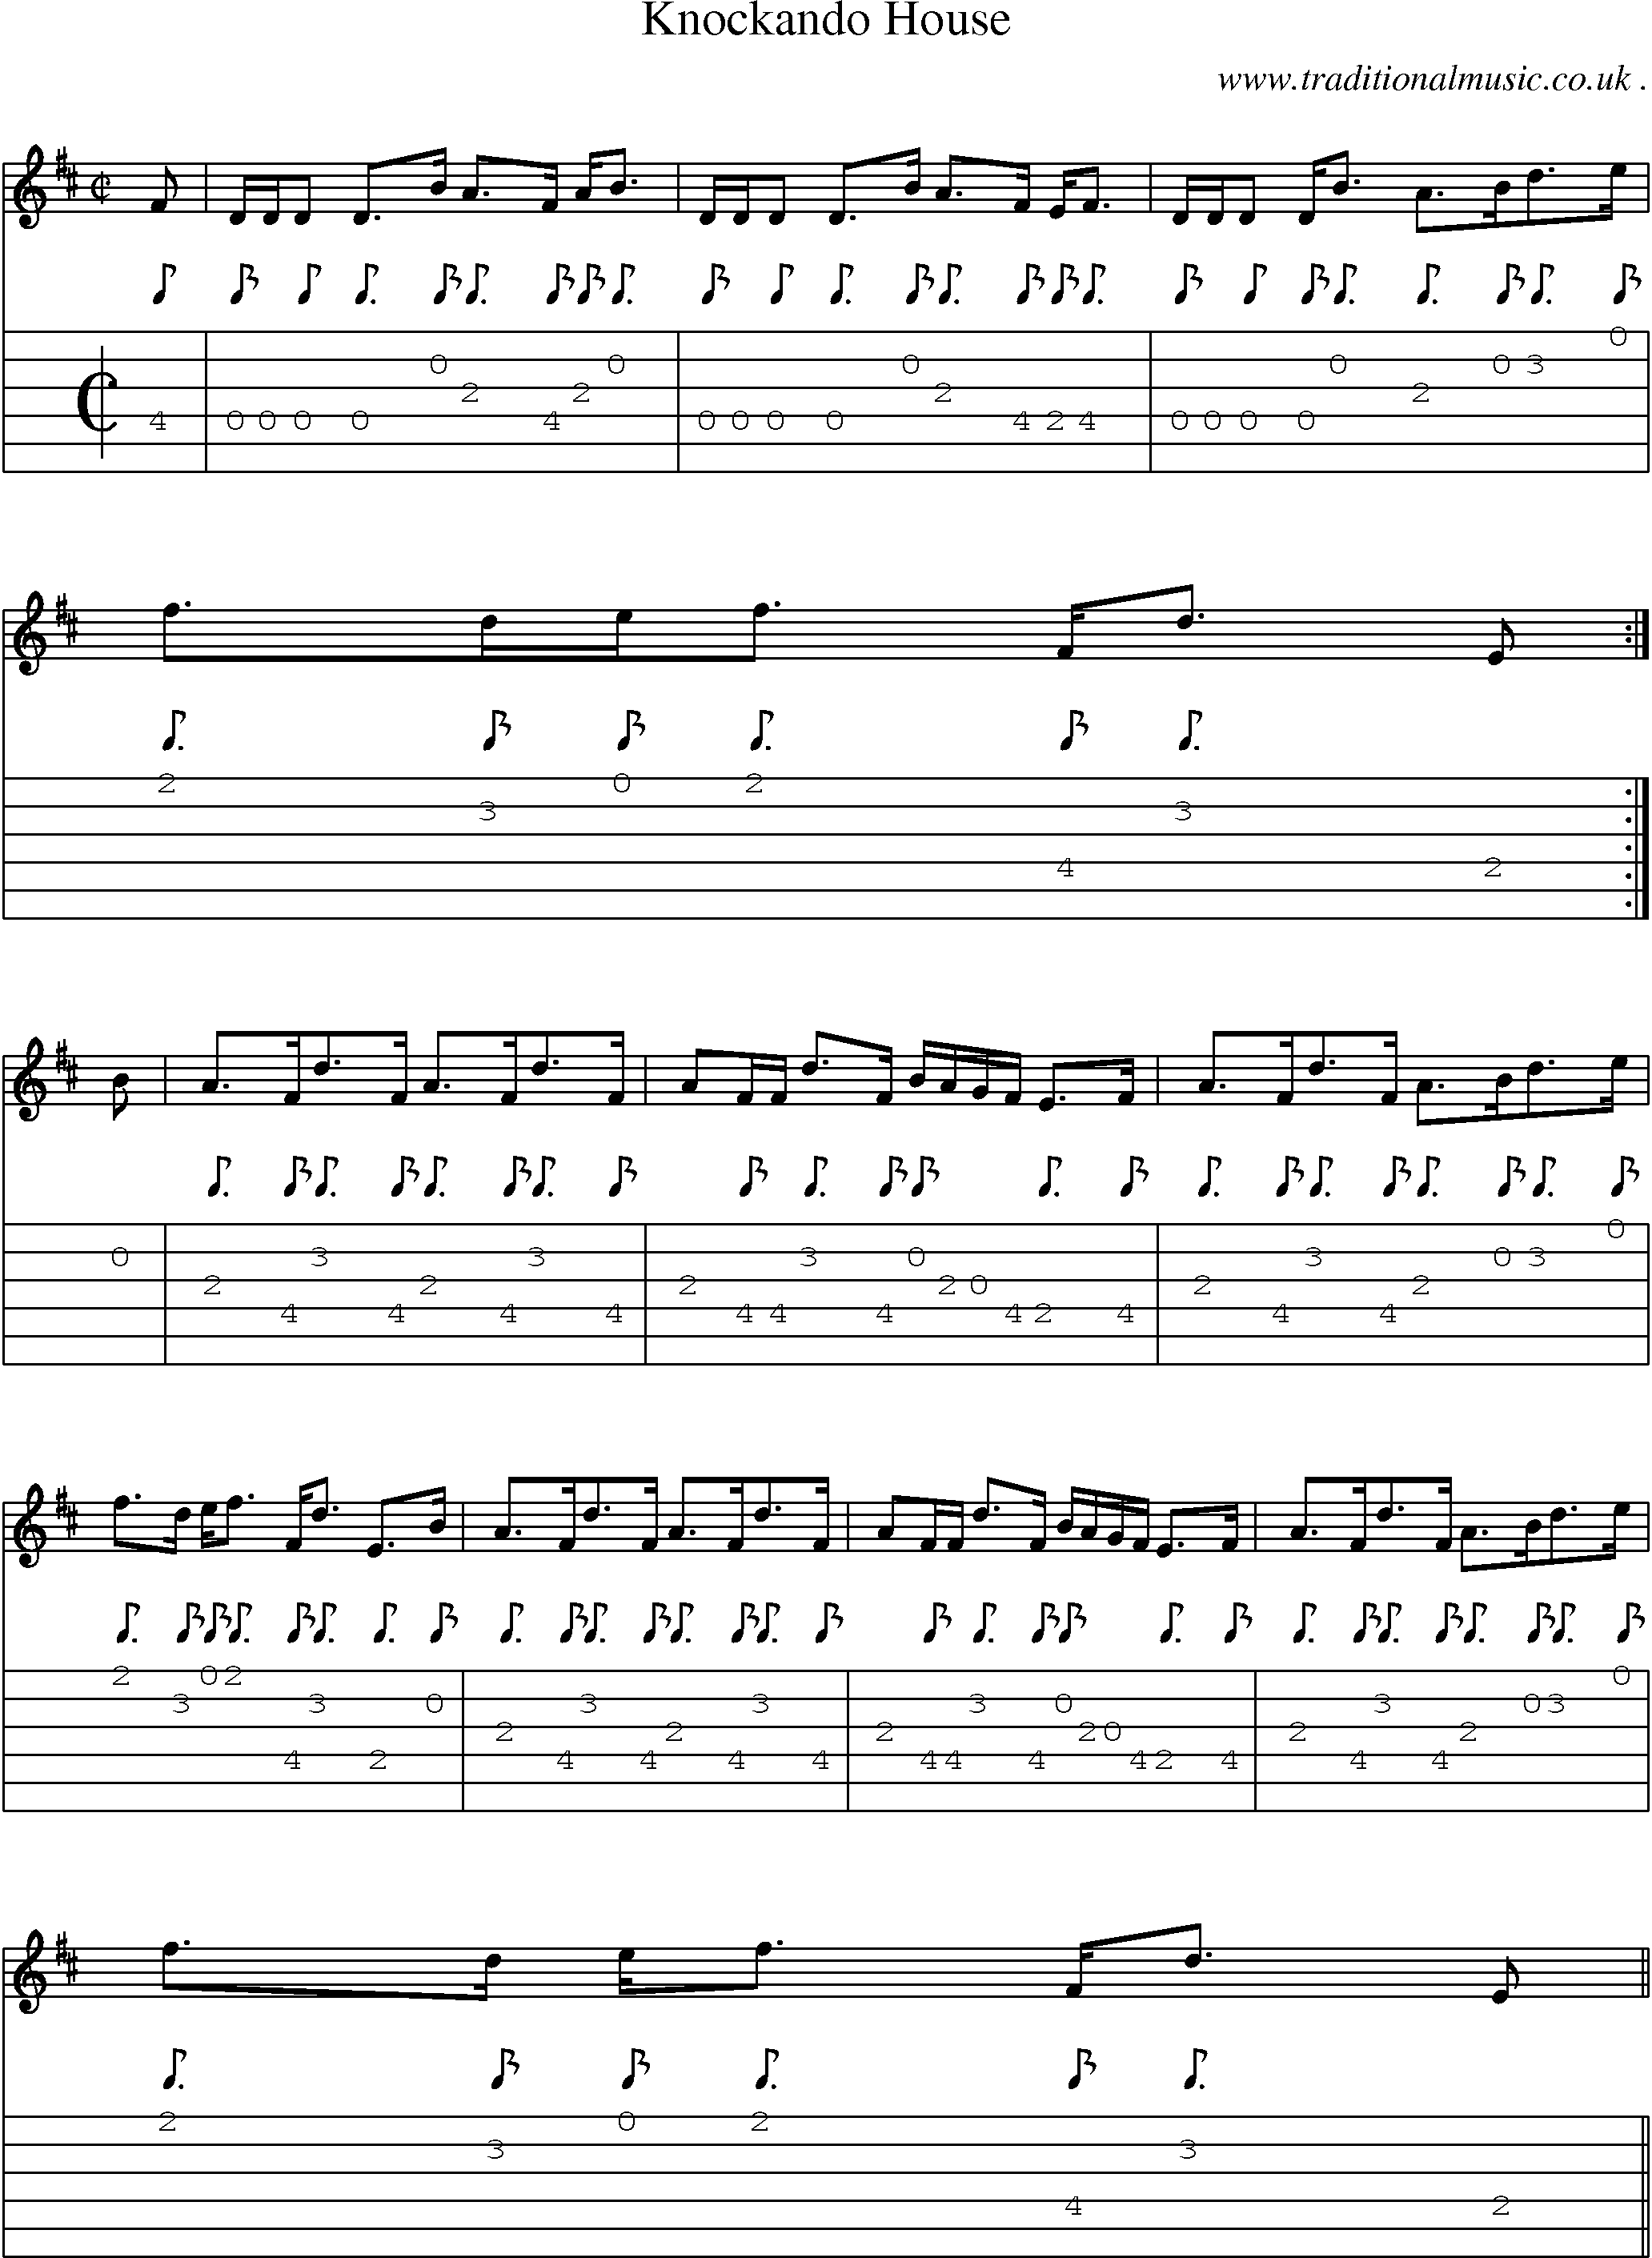 Sheet-music  score, Chords and Guitar Tabs for Knockando House